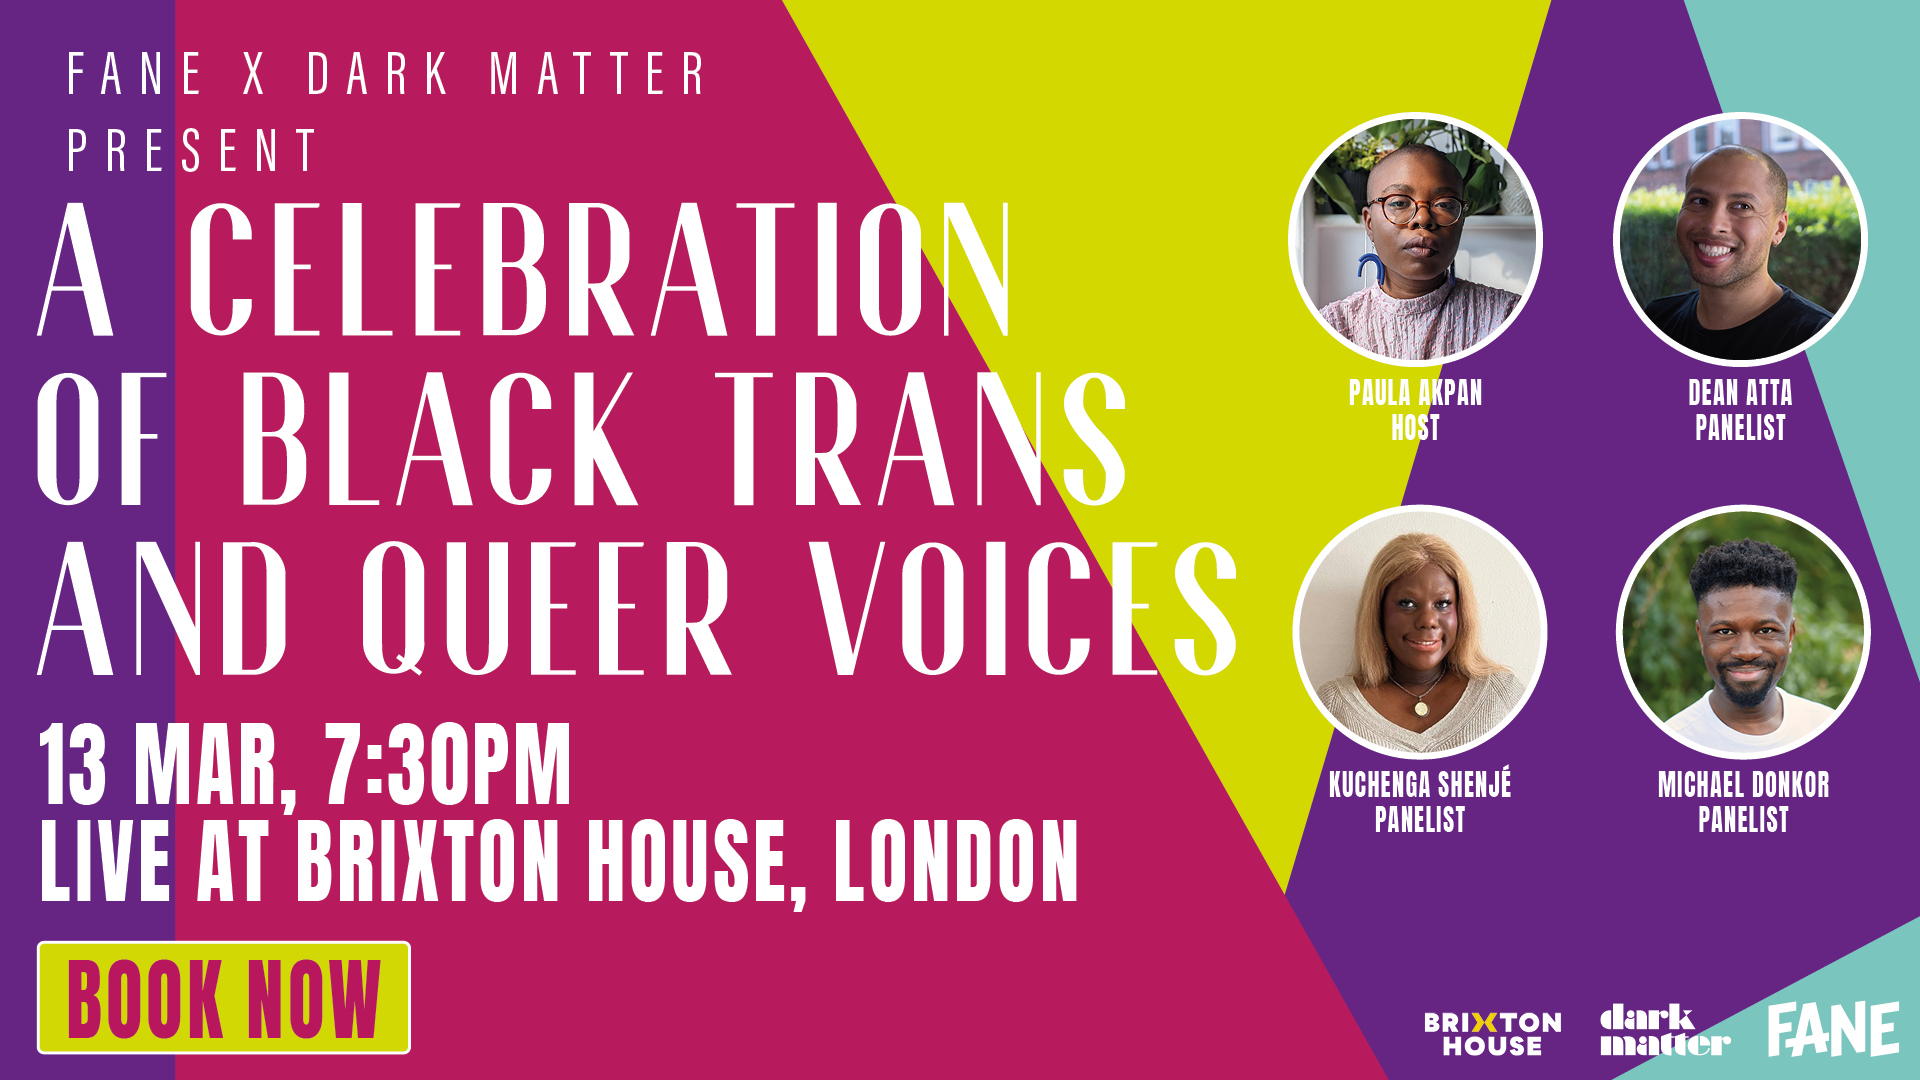 Dark Matter x Fane presents: A Celebration of Black Trans and Queer Stories